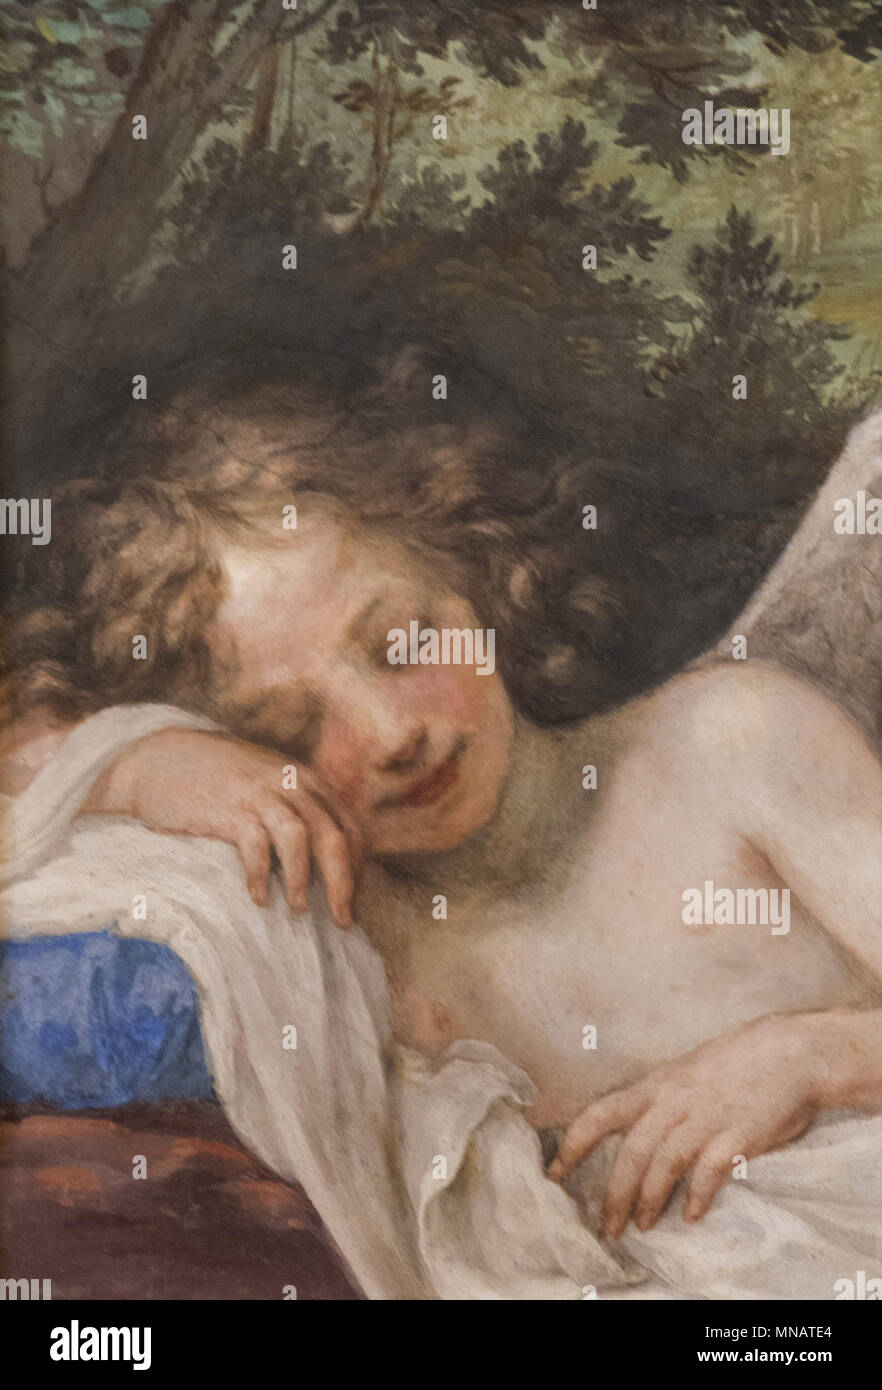 Volterrano - Amore Dormiente - Gallery Pitti Palace Florence Italy Stock Photo